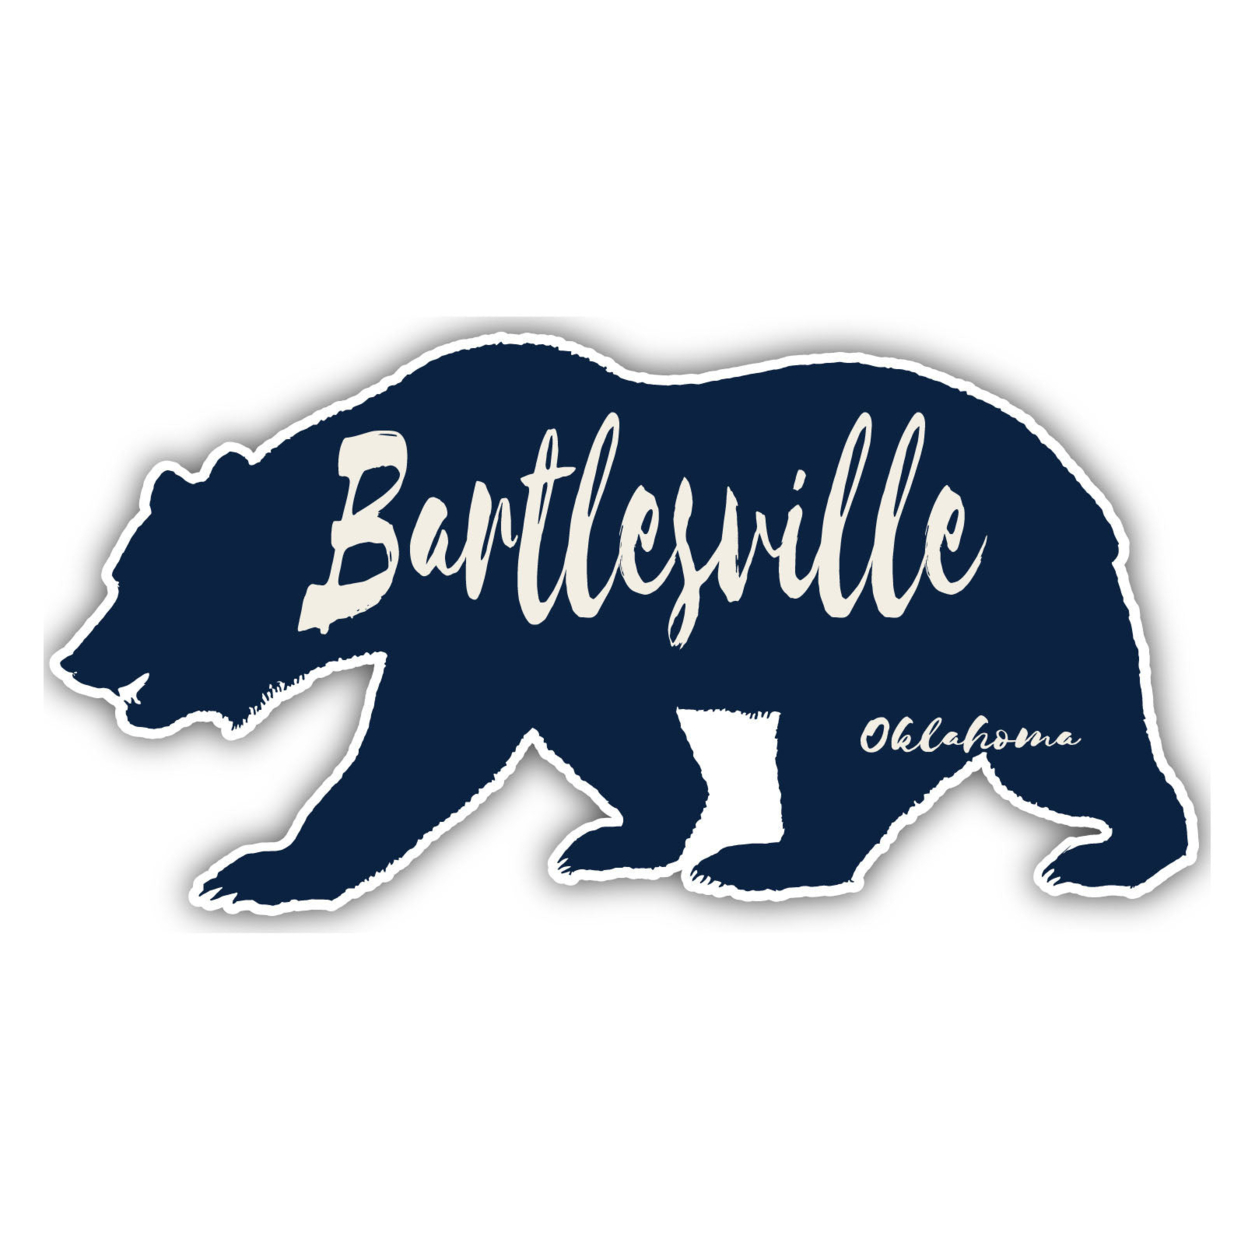 Bartlesville Oklahoma Souvenir Decorative Stickers (Choose Theme And Size) - 4-Pack, 10-Inch, Bear